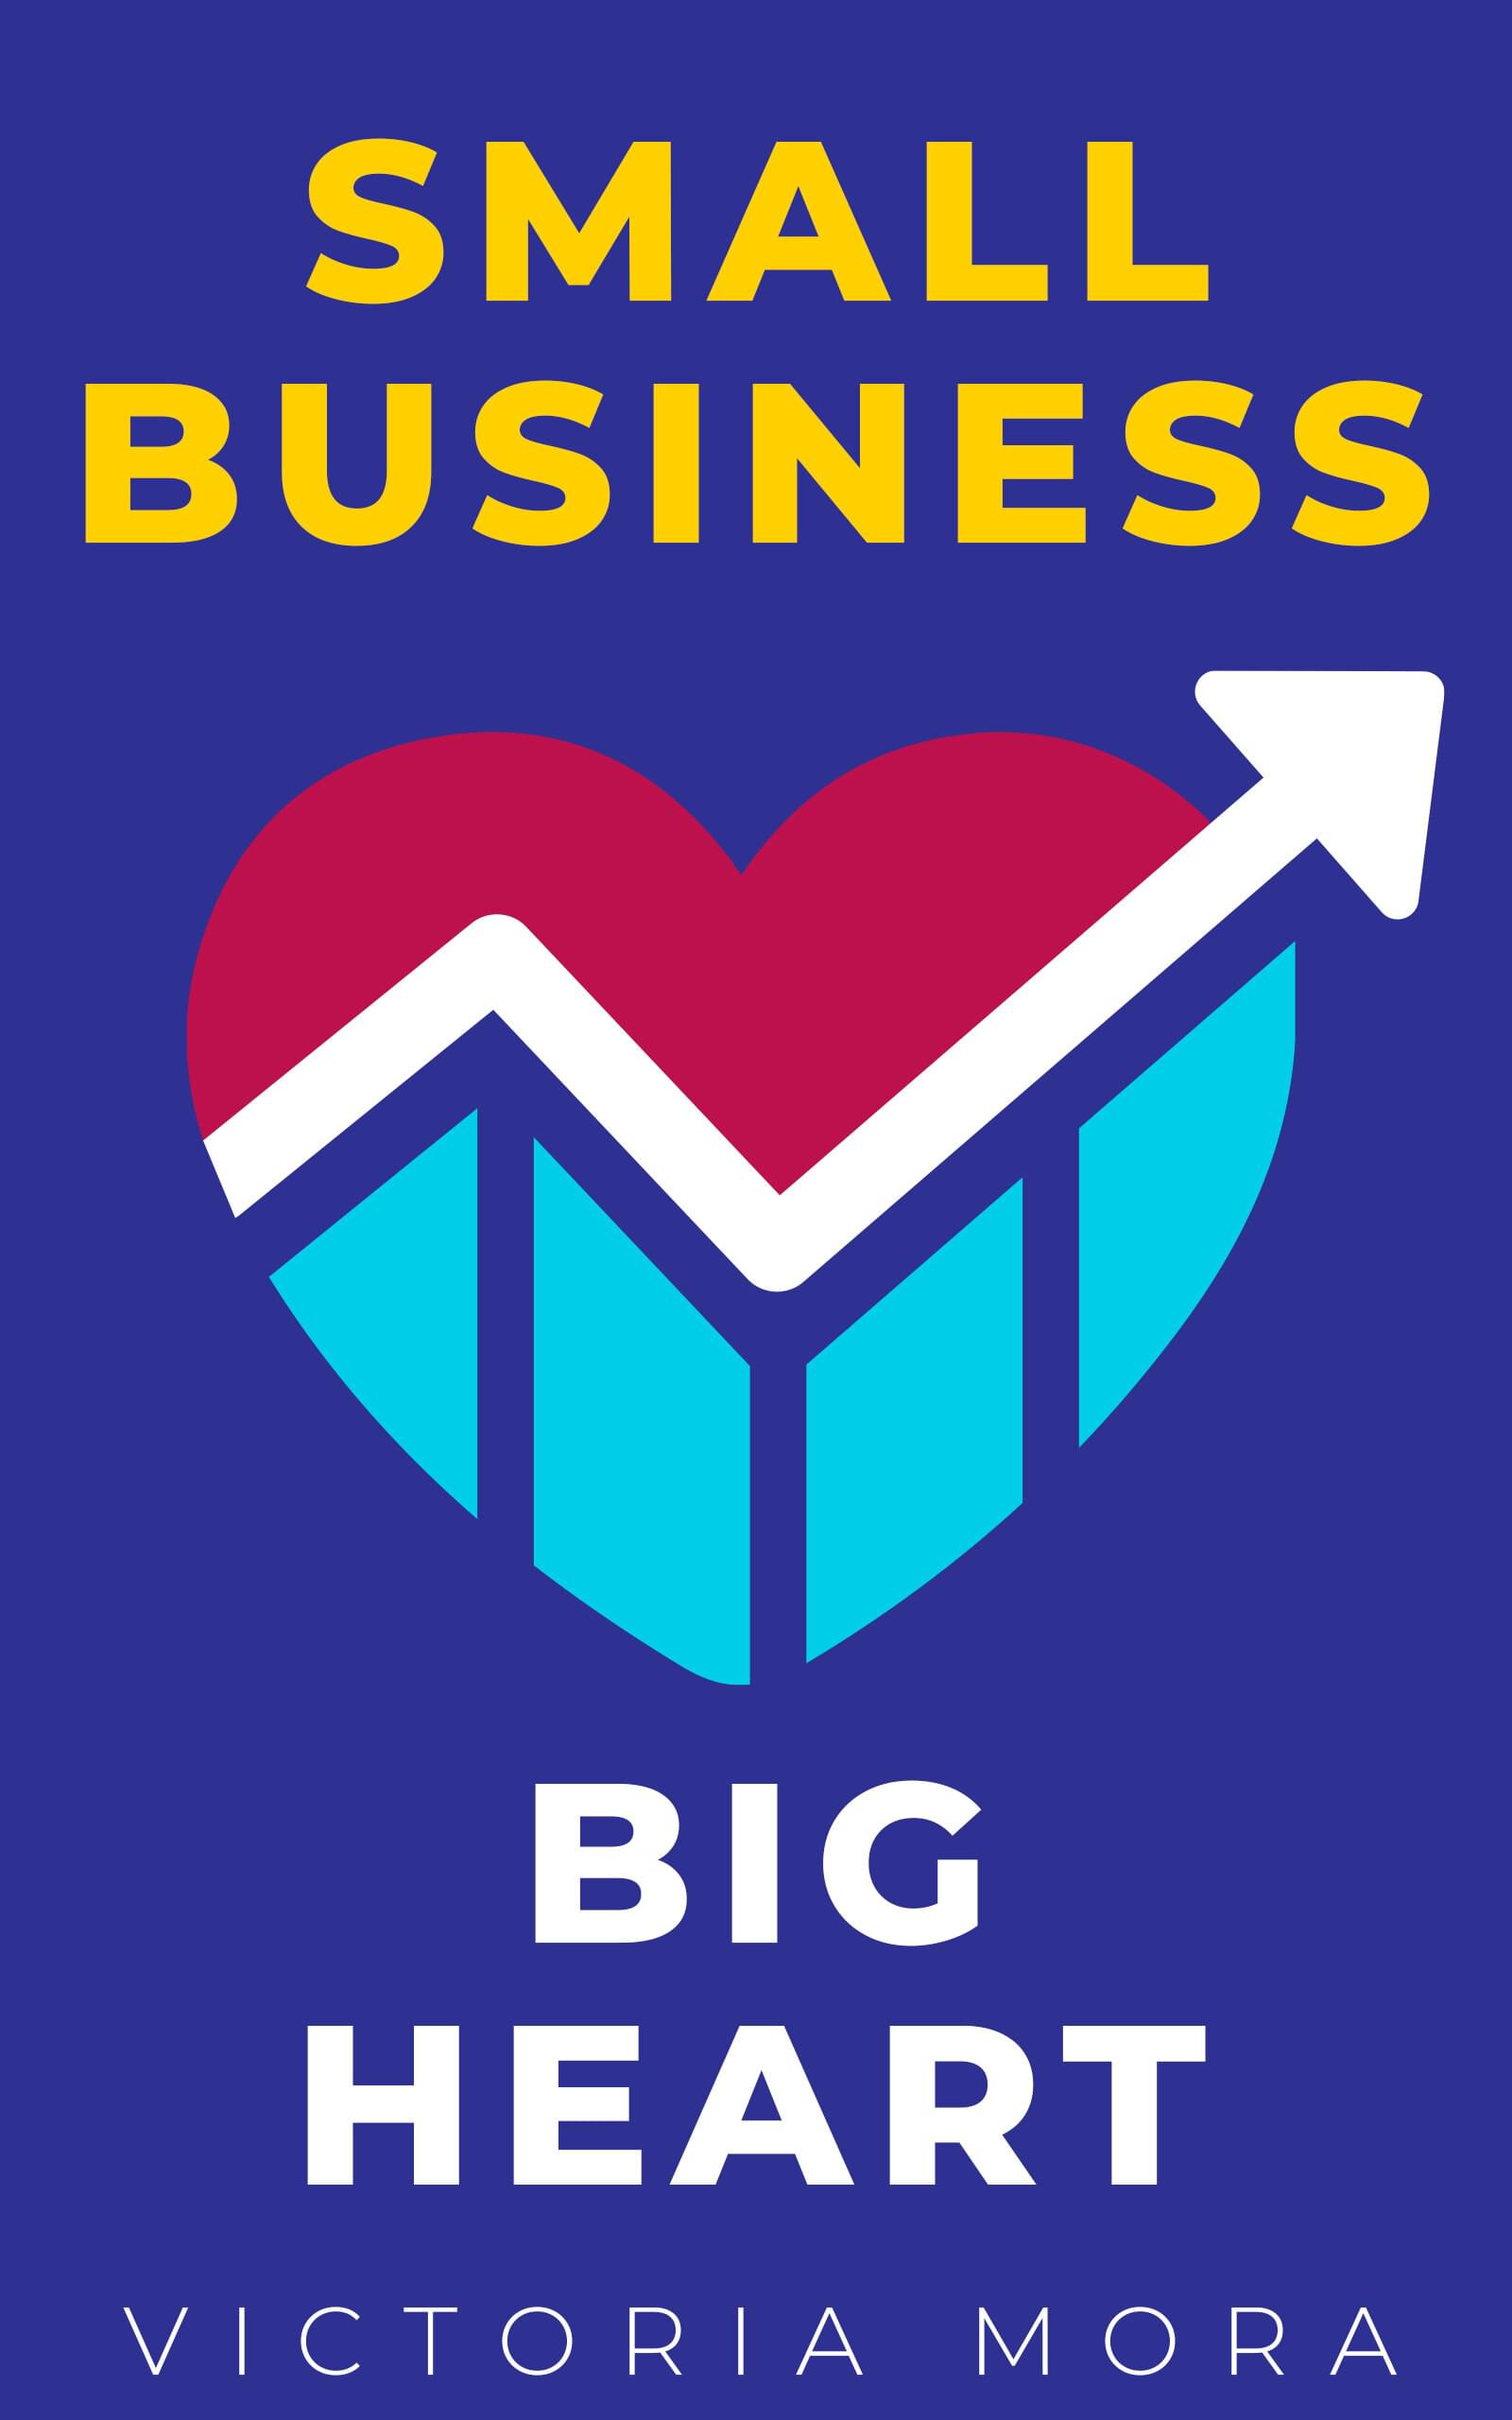 Small Business Big Heart by Victoria Mora